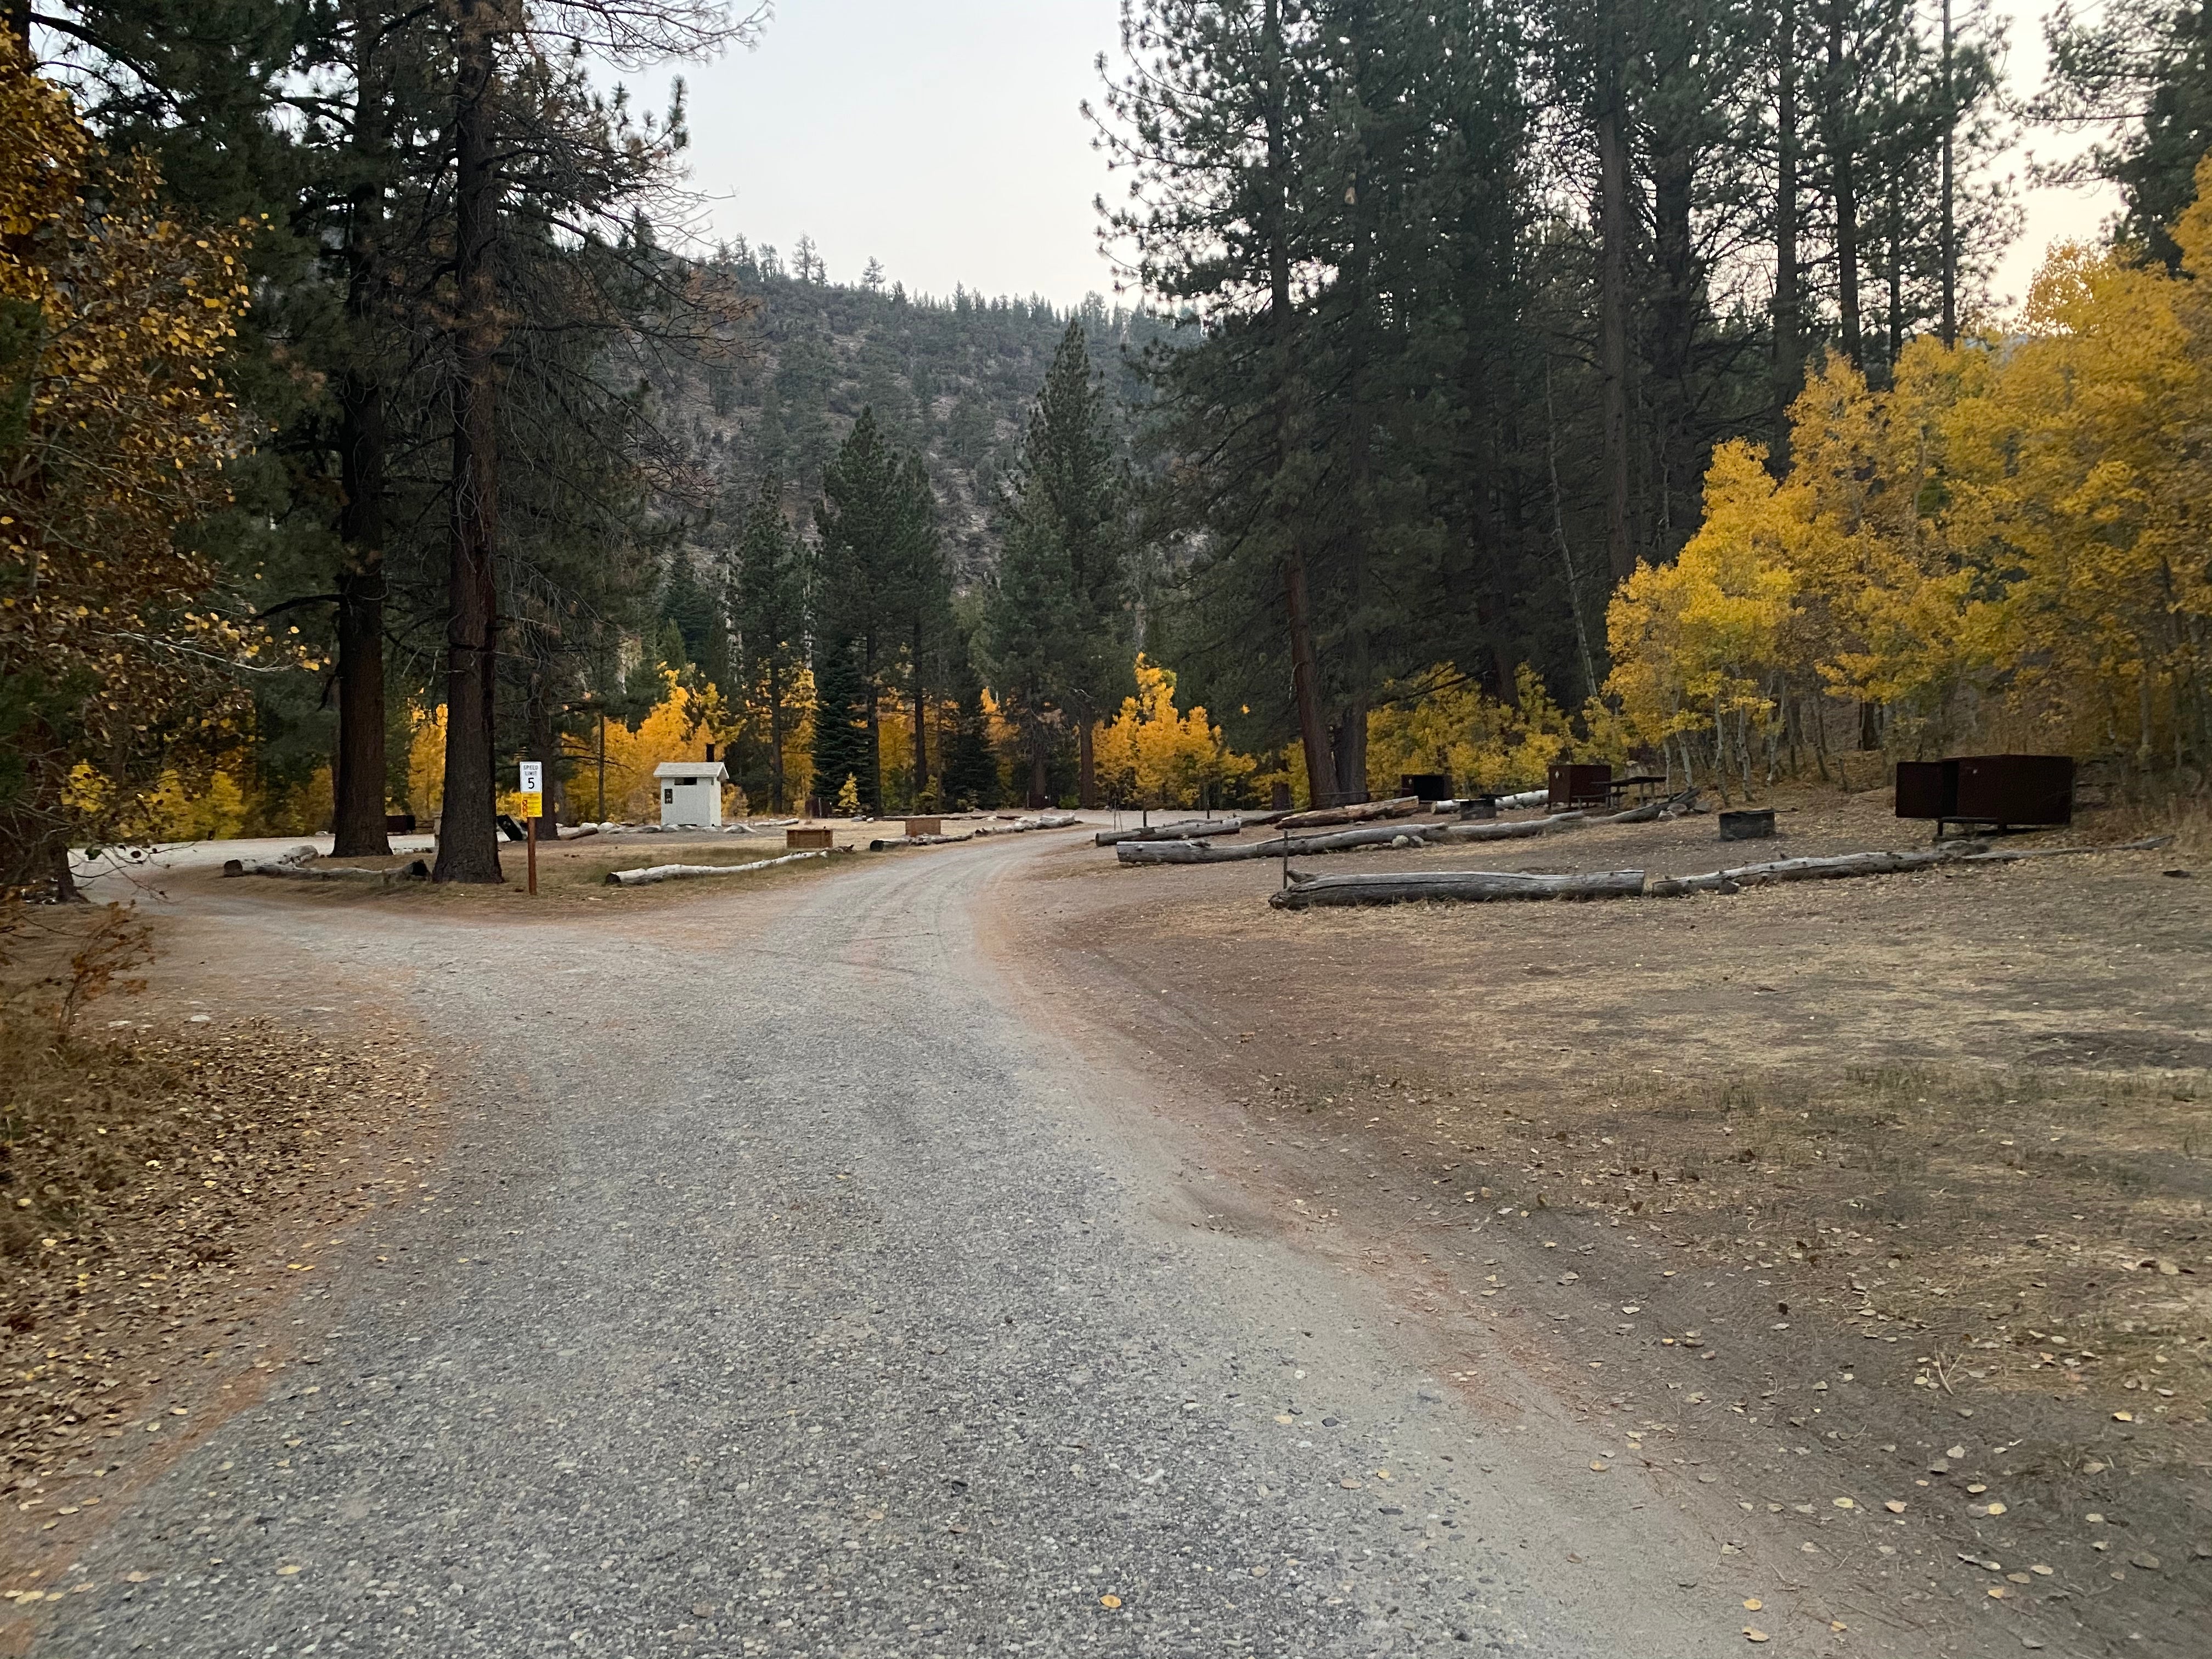 Camper submitted image from Lower Lee Vining Campground - 4